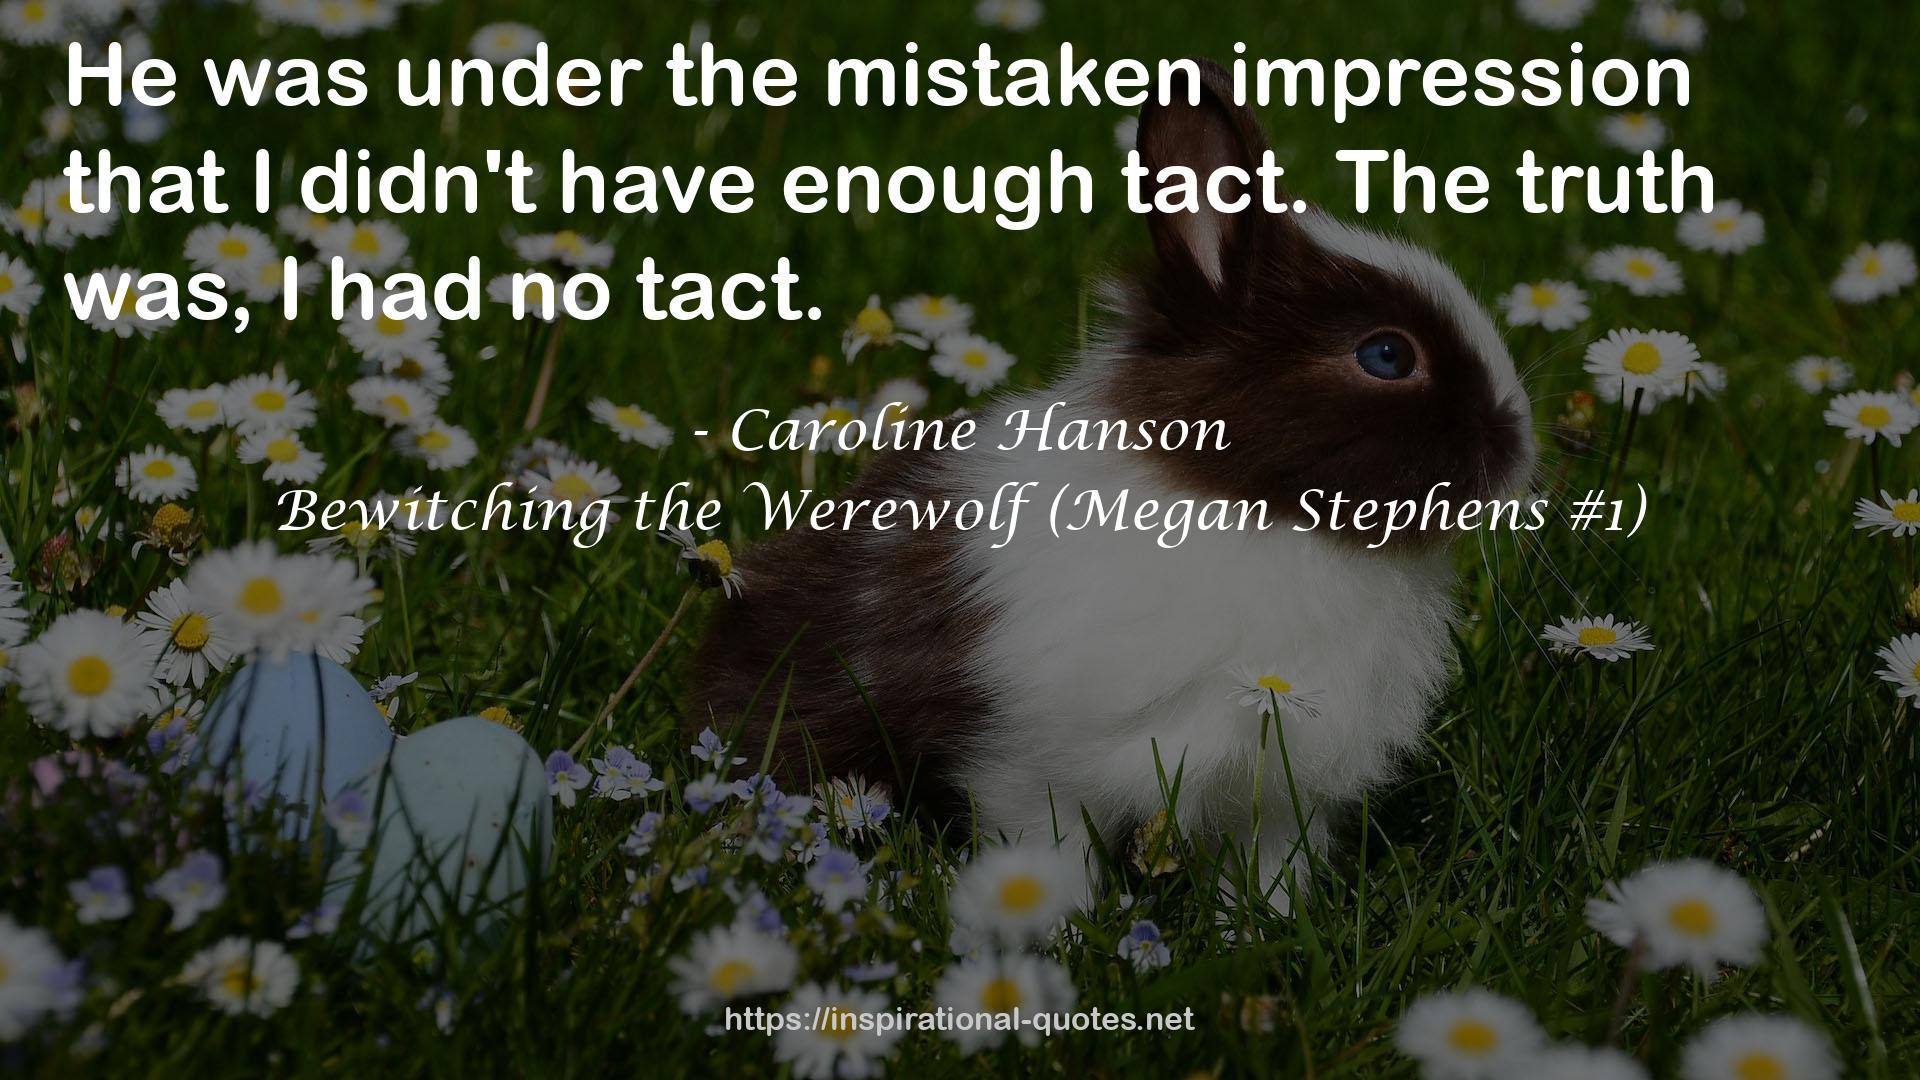 Bewitching the Werewolf (Megan Stephens #1) QUOTES